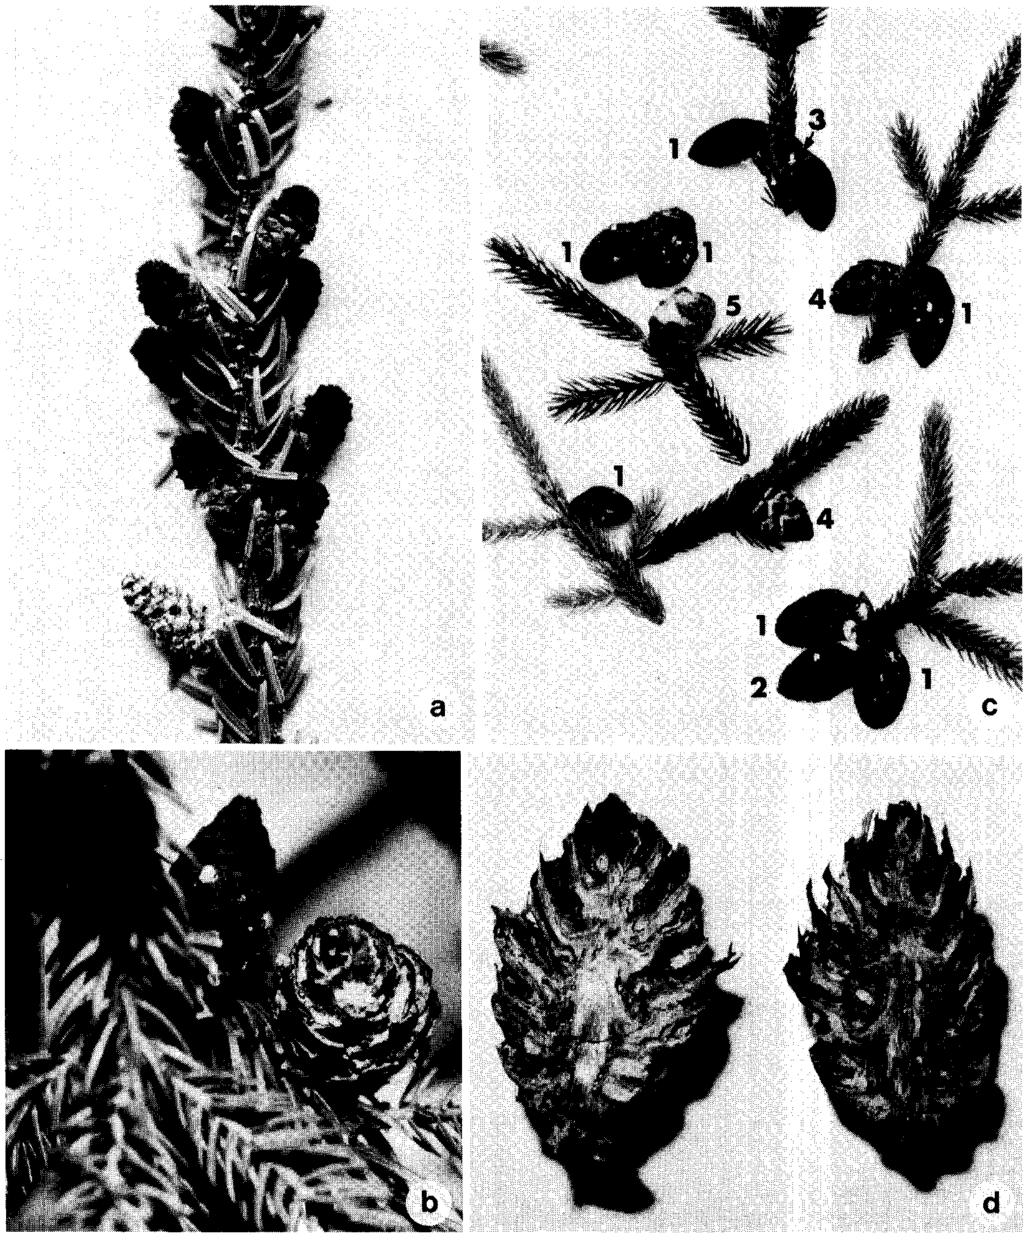 46 lnventaire des maladies des plantes au Canada 6 1 :2, 198 1 Fig. 2. Cone rust symptoms. a & b. Severely rusted cones on shoots: c. Different levels of the cone rust intensity (CRIRS); and d.